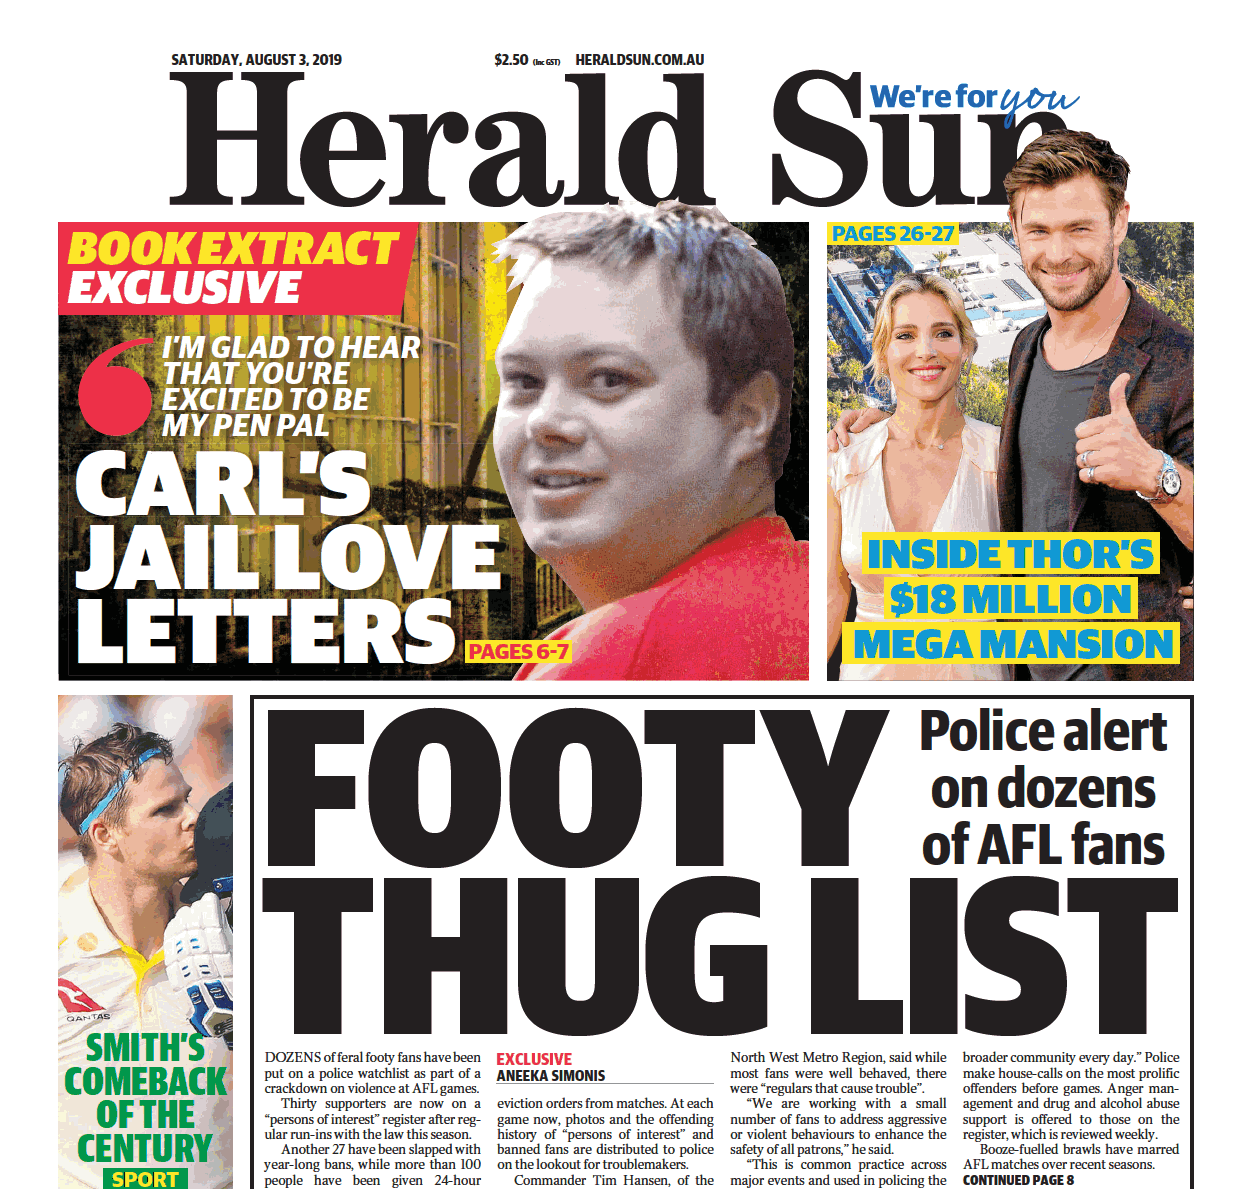 Herald Sun Front Page Today Herald Sun Front Page News Herald Sun